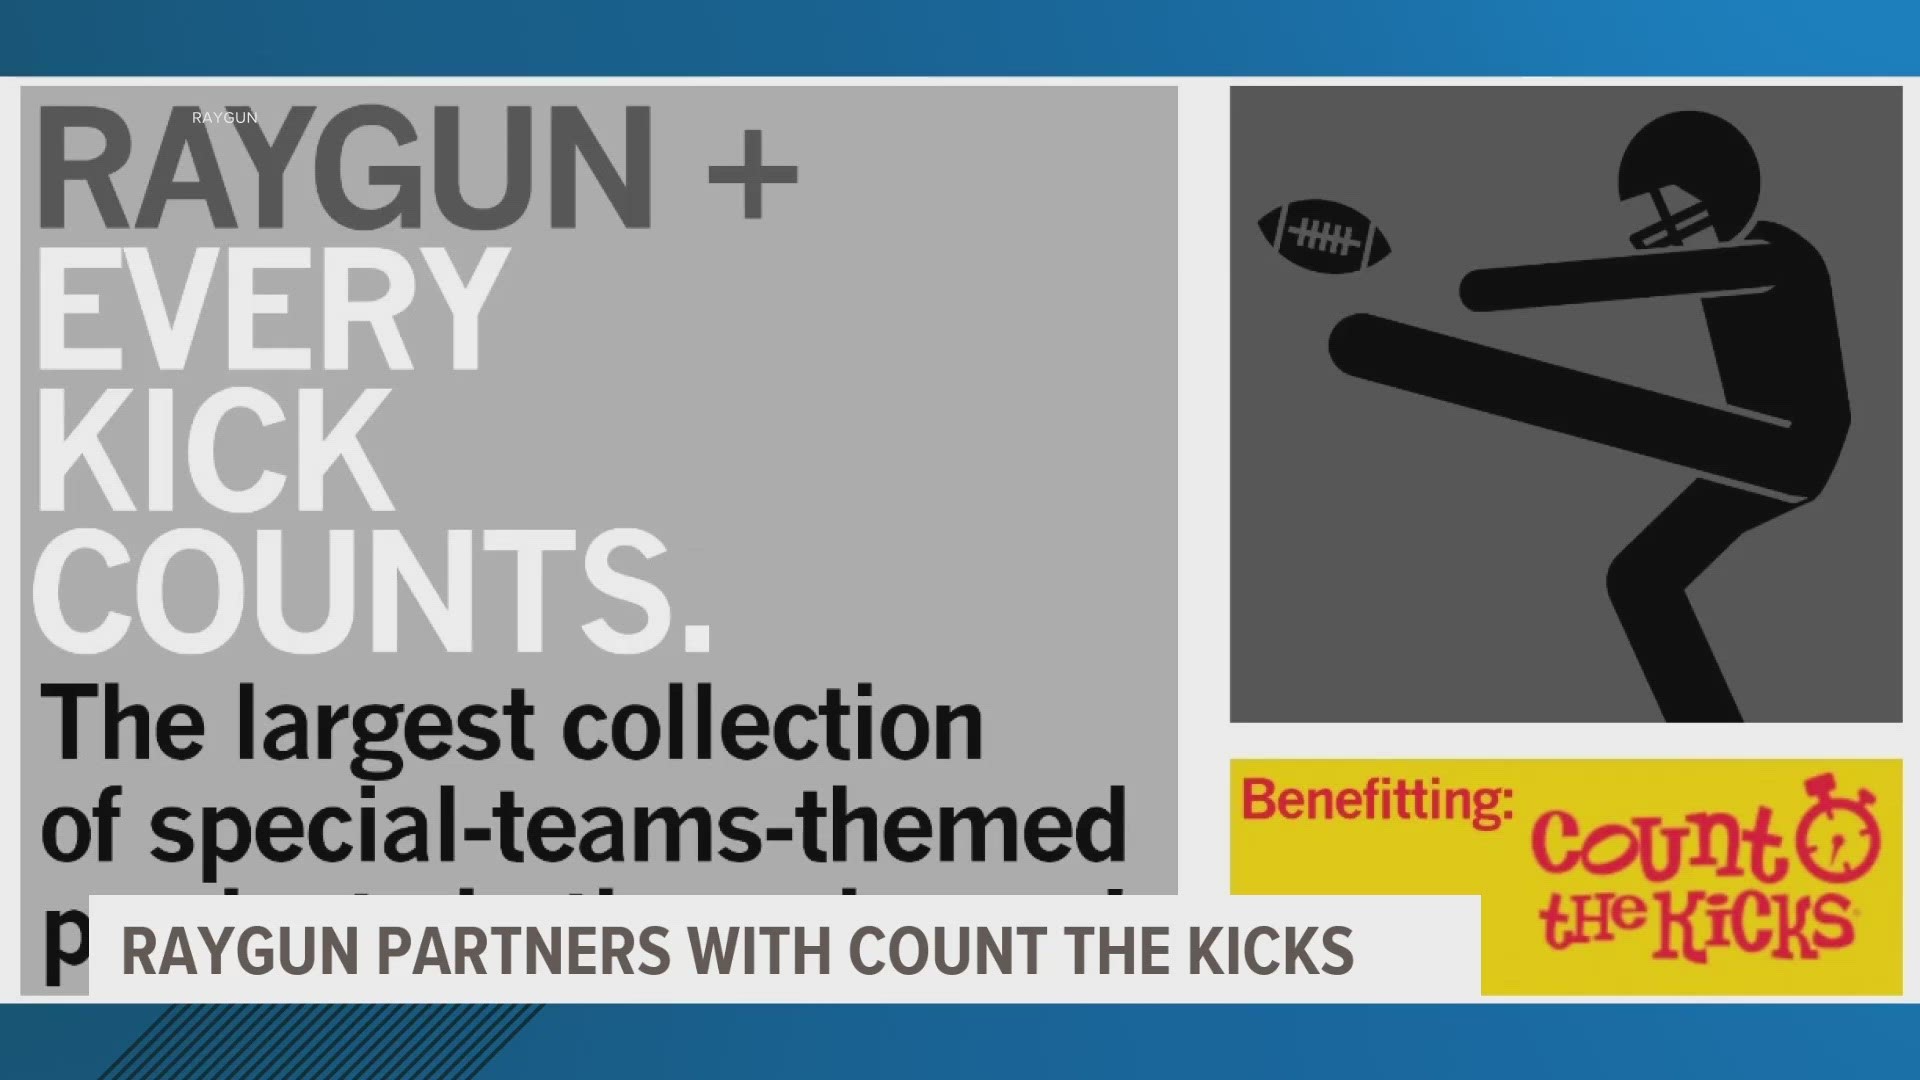 According to RAYGUN's website, "some proceeds from these shirt sales go to Count the Kicks" and their stillbirth prevention efforts.